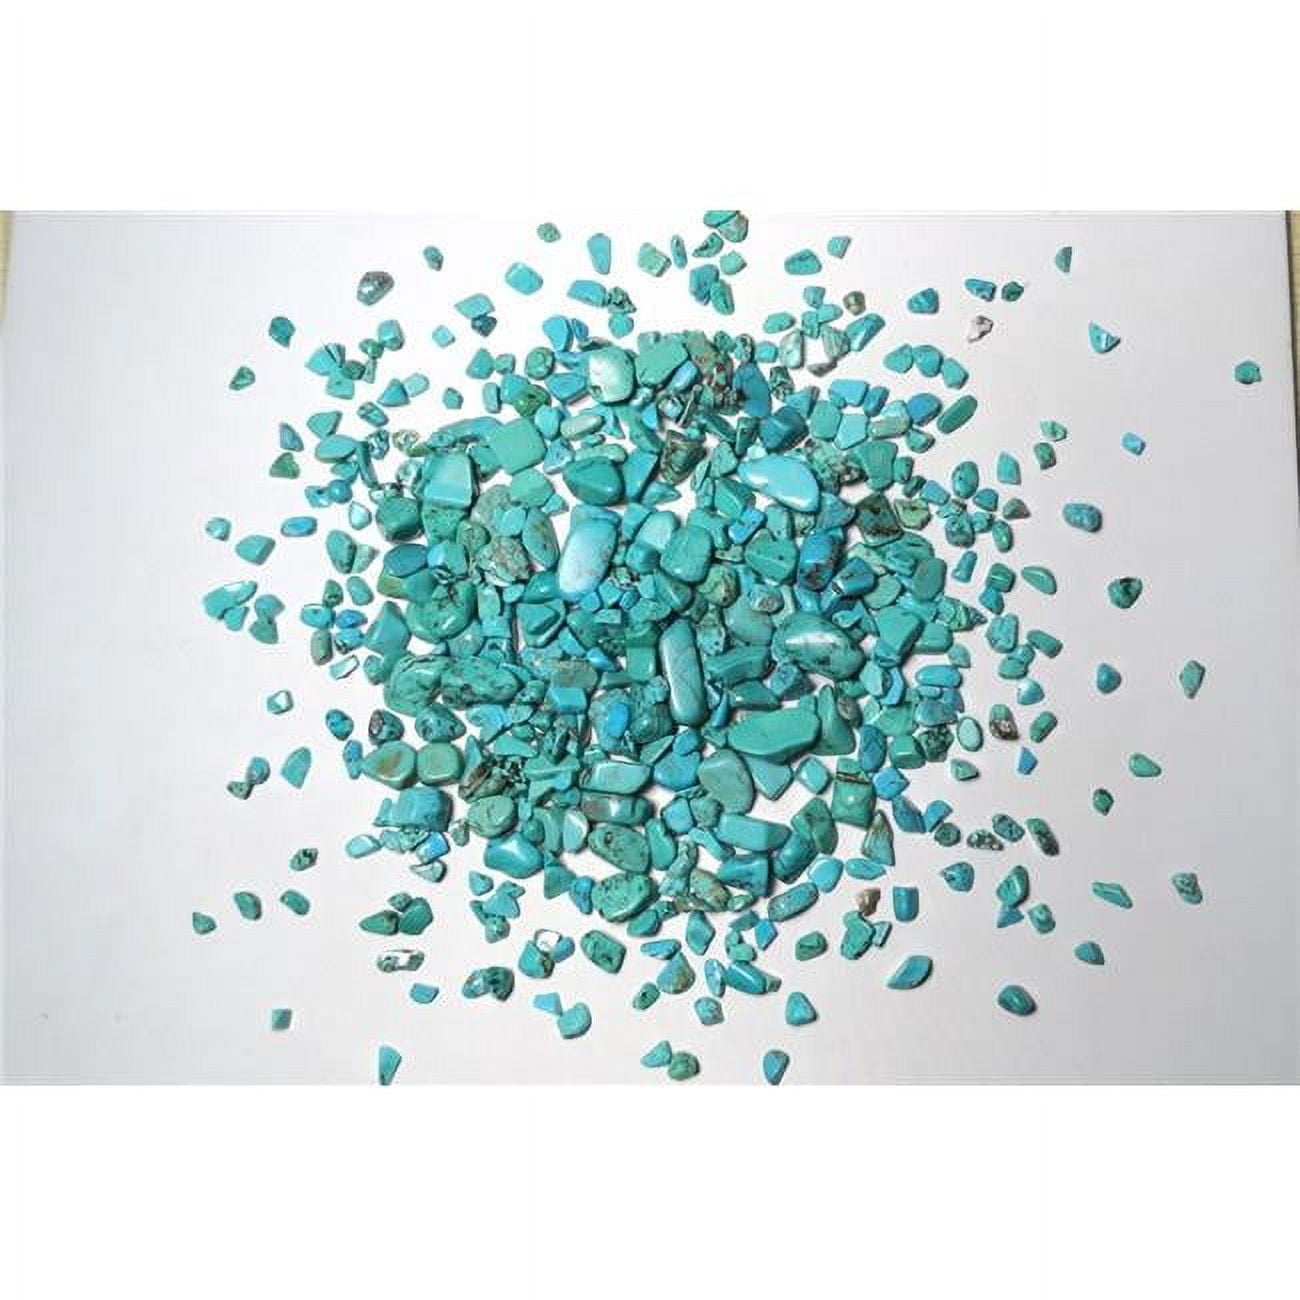 Rk460tur 1 Lbs Howlite Turquoise Tumbled Chips Stone